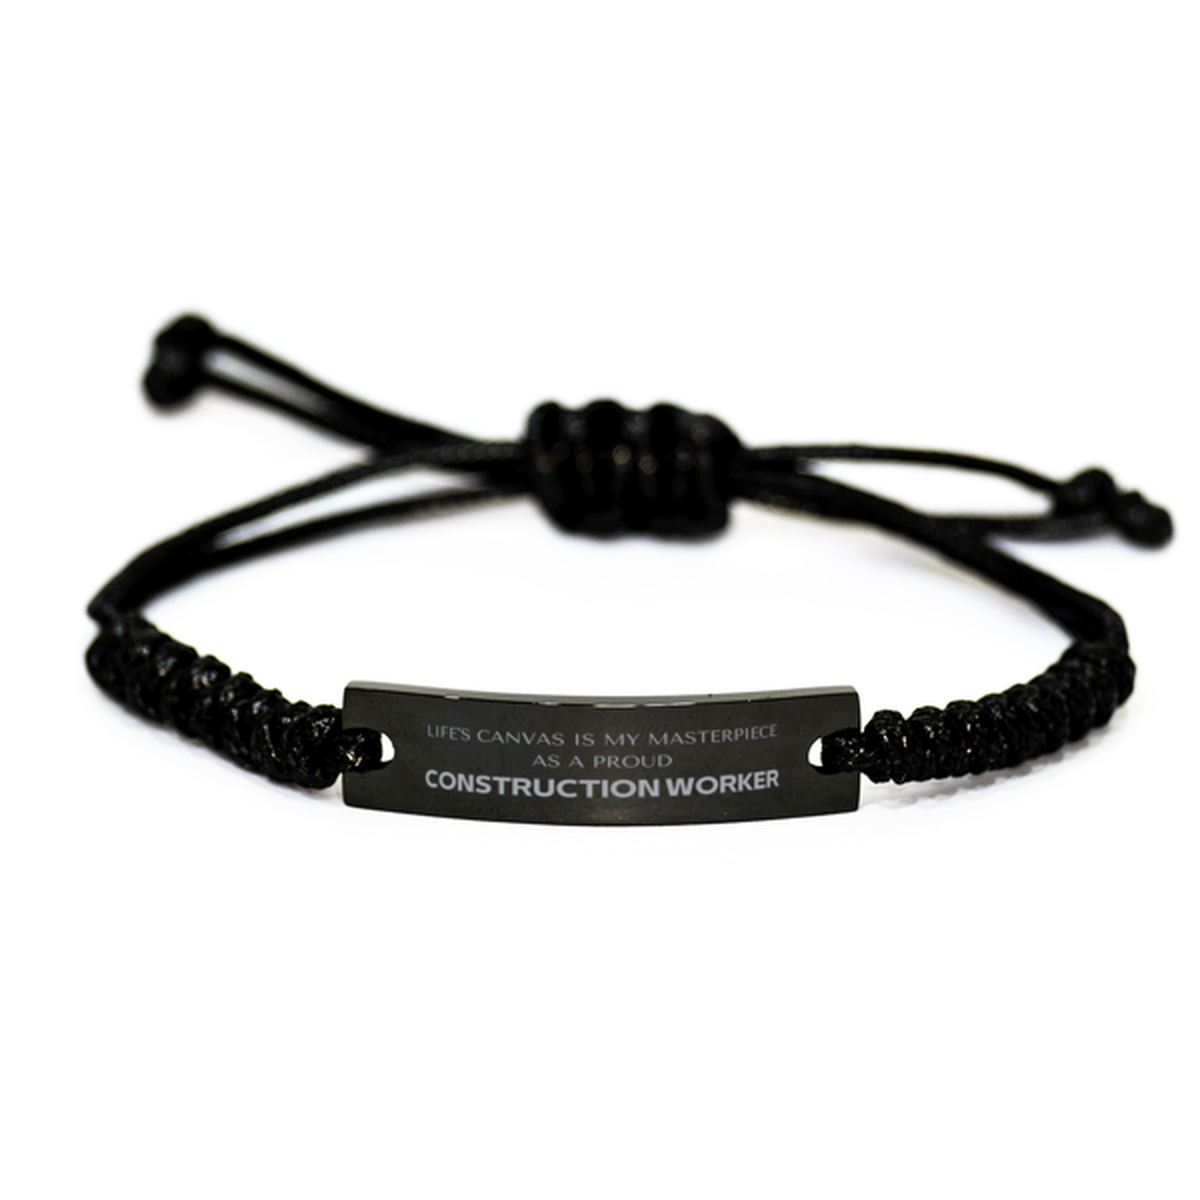 Proud Construction Worker Gifts, Life's canvas is my masterpiece, Epic Birthday Christmas Unique Black Rope Bracelet For Construction Worker, Coworkers, Men, Women, Friends